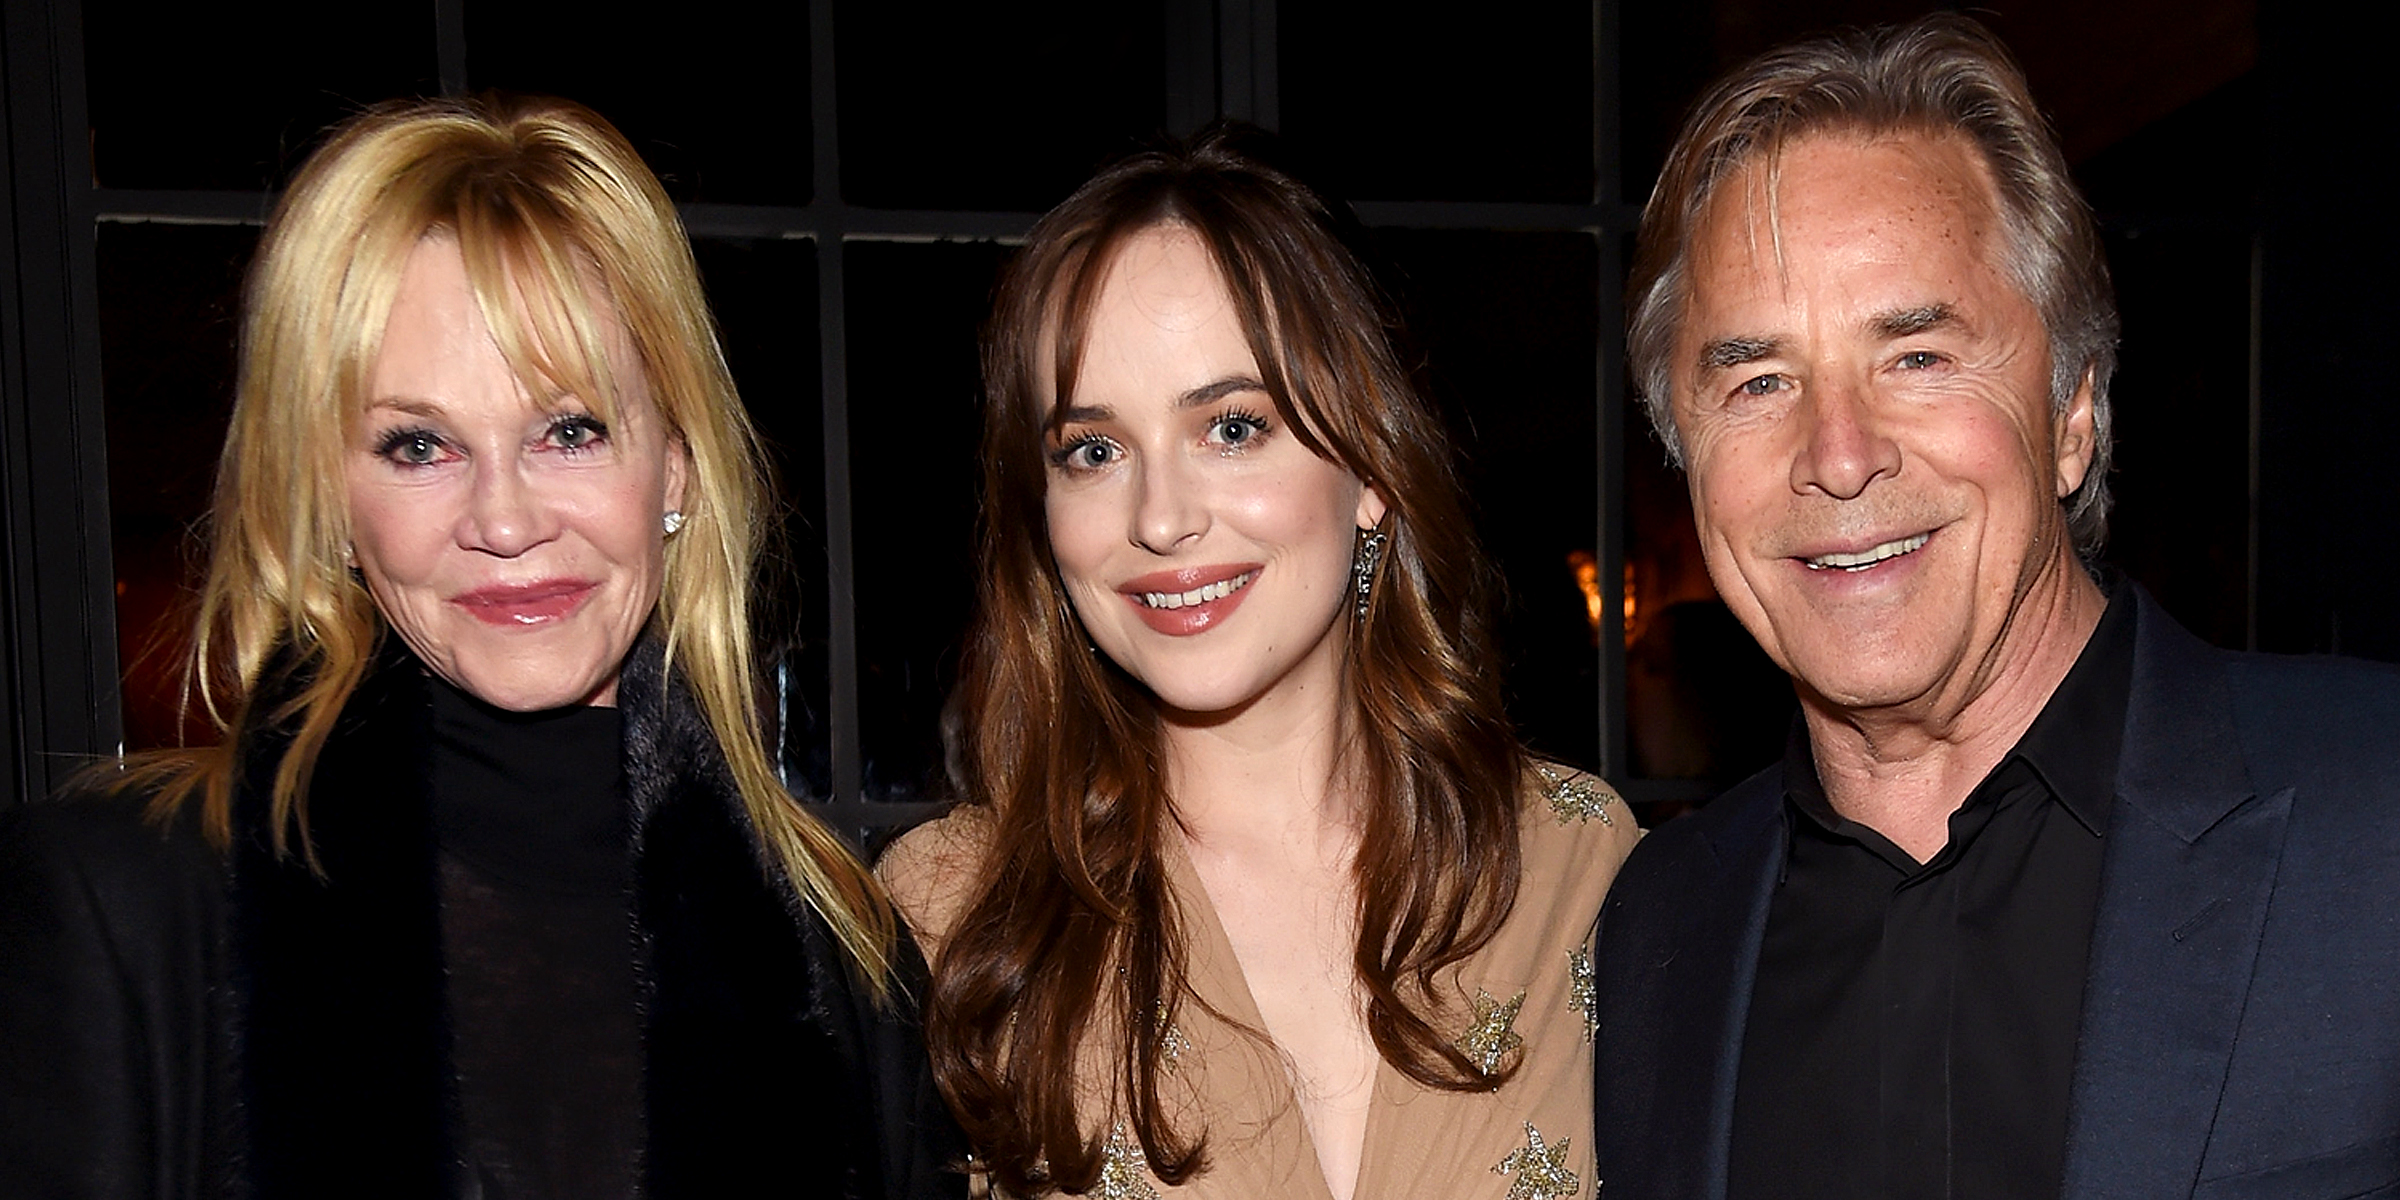 Melanie Griffith, Dakota and Don Johnson | Source: Getty Images